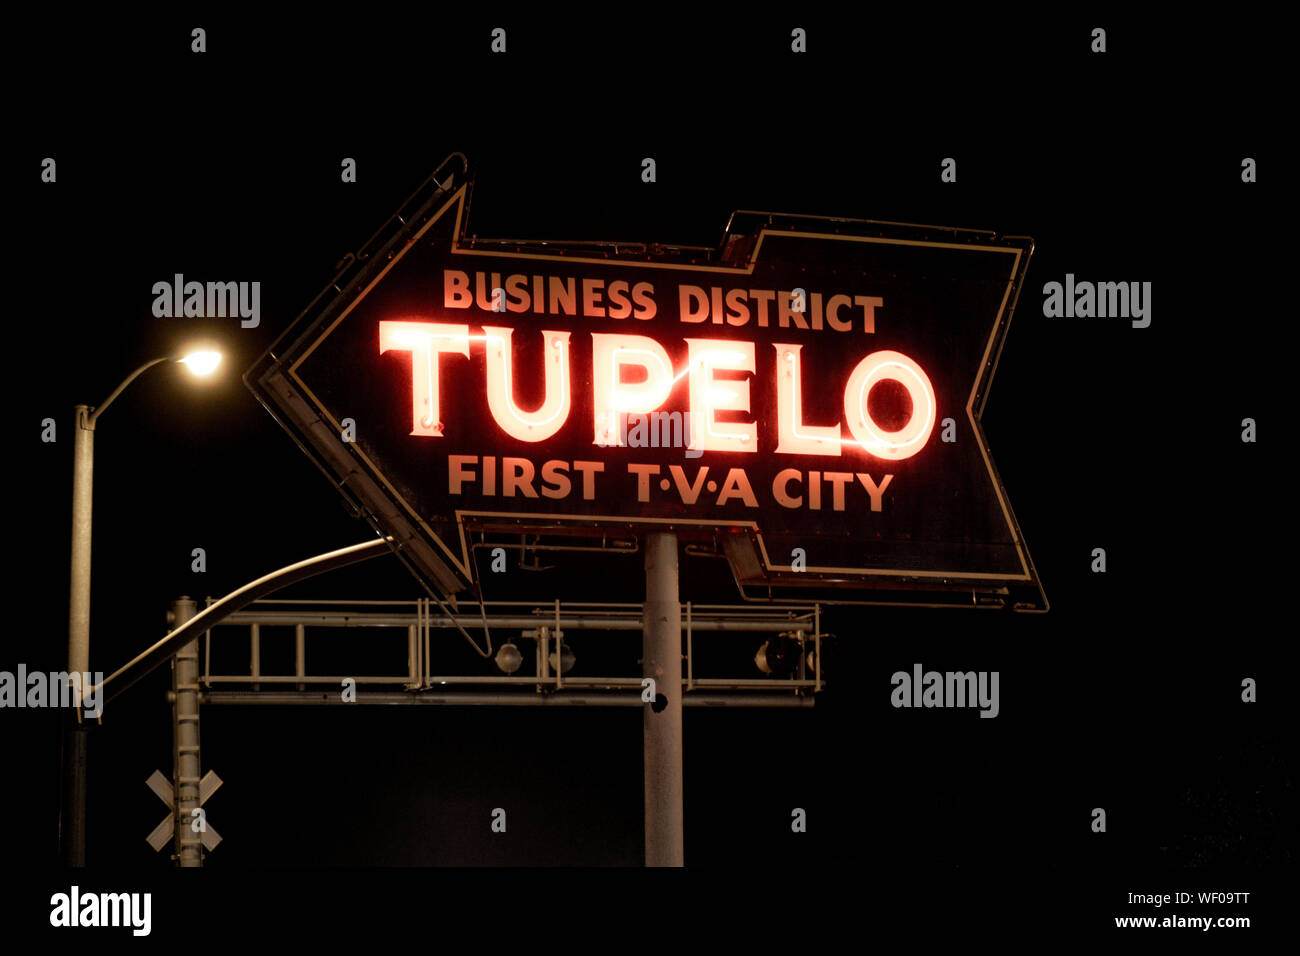 Old neon sign at night with arrow pointing towards the Tupelo, business District, with slogan, 'First TVA City', at railroad crossing in Tupelo, MS Stock Photo